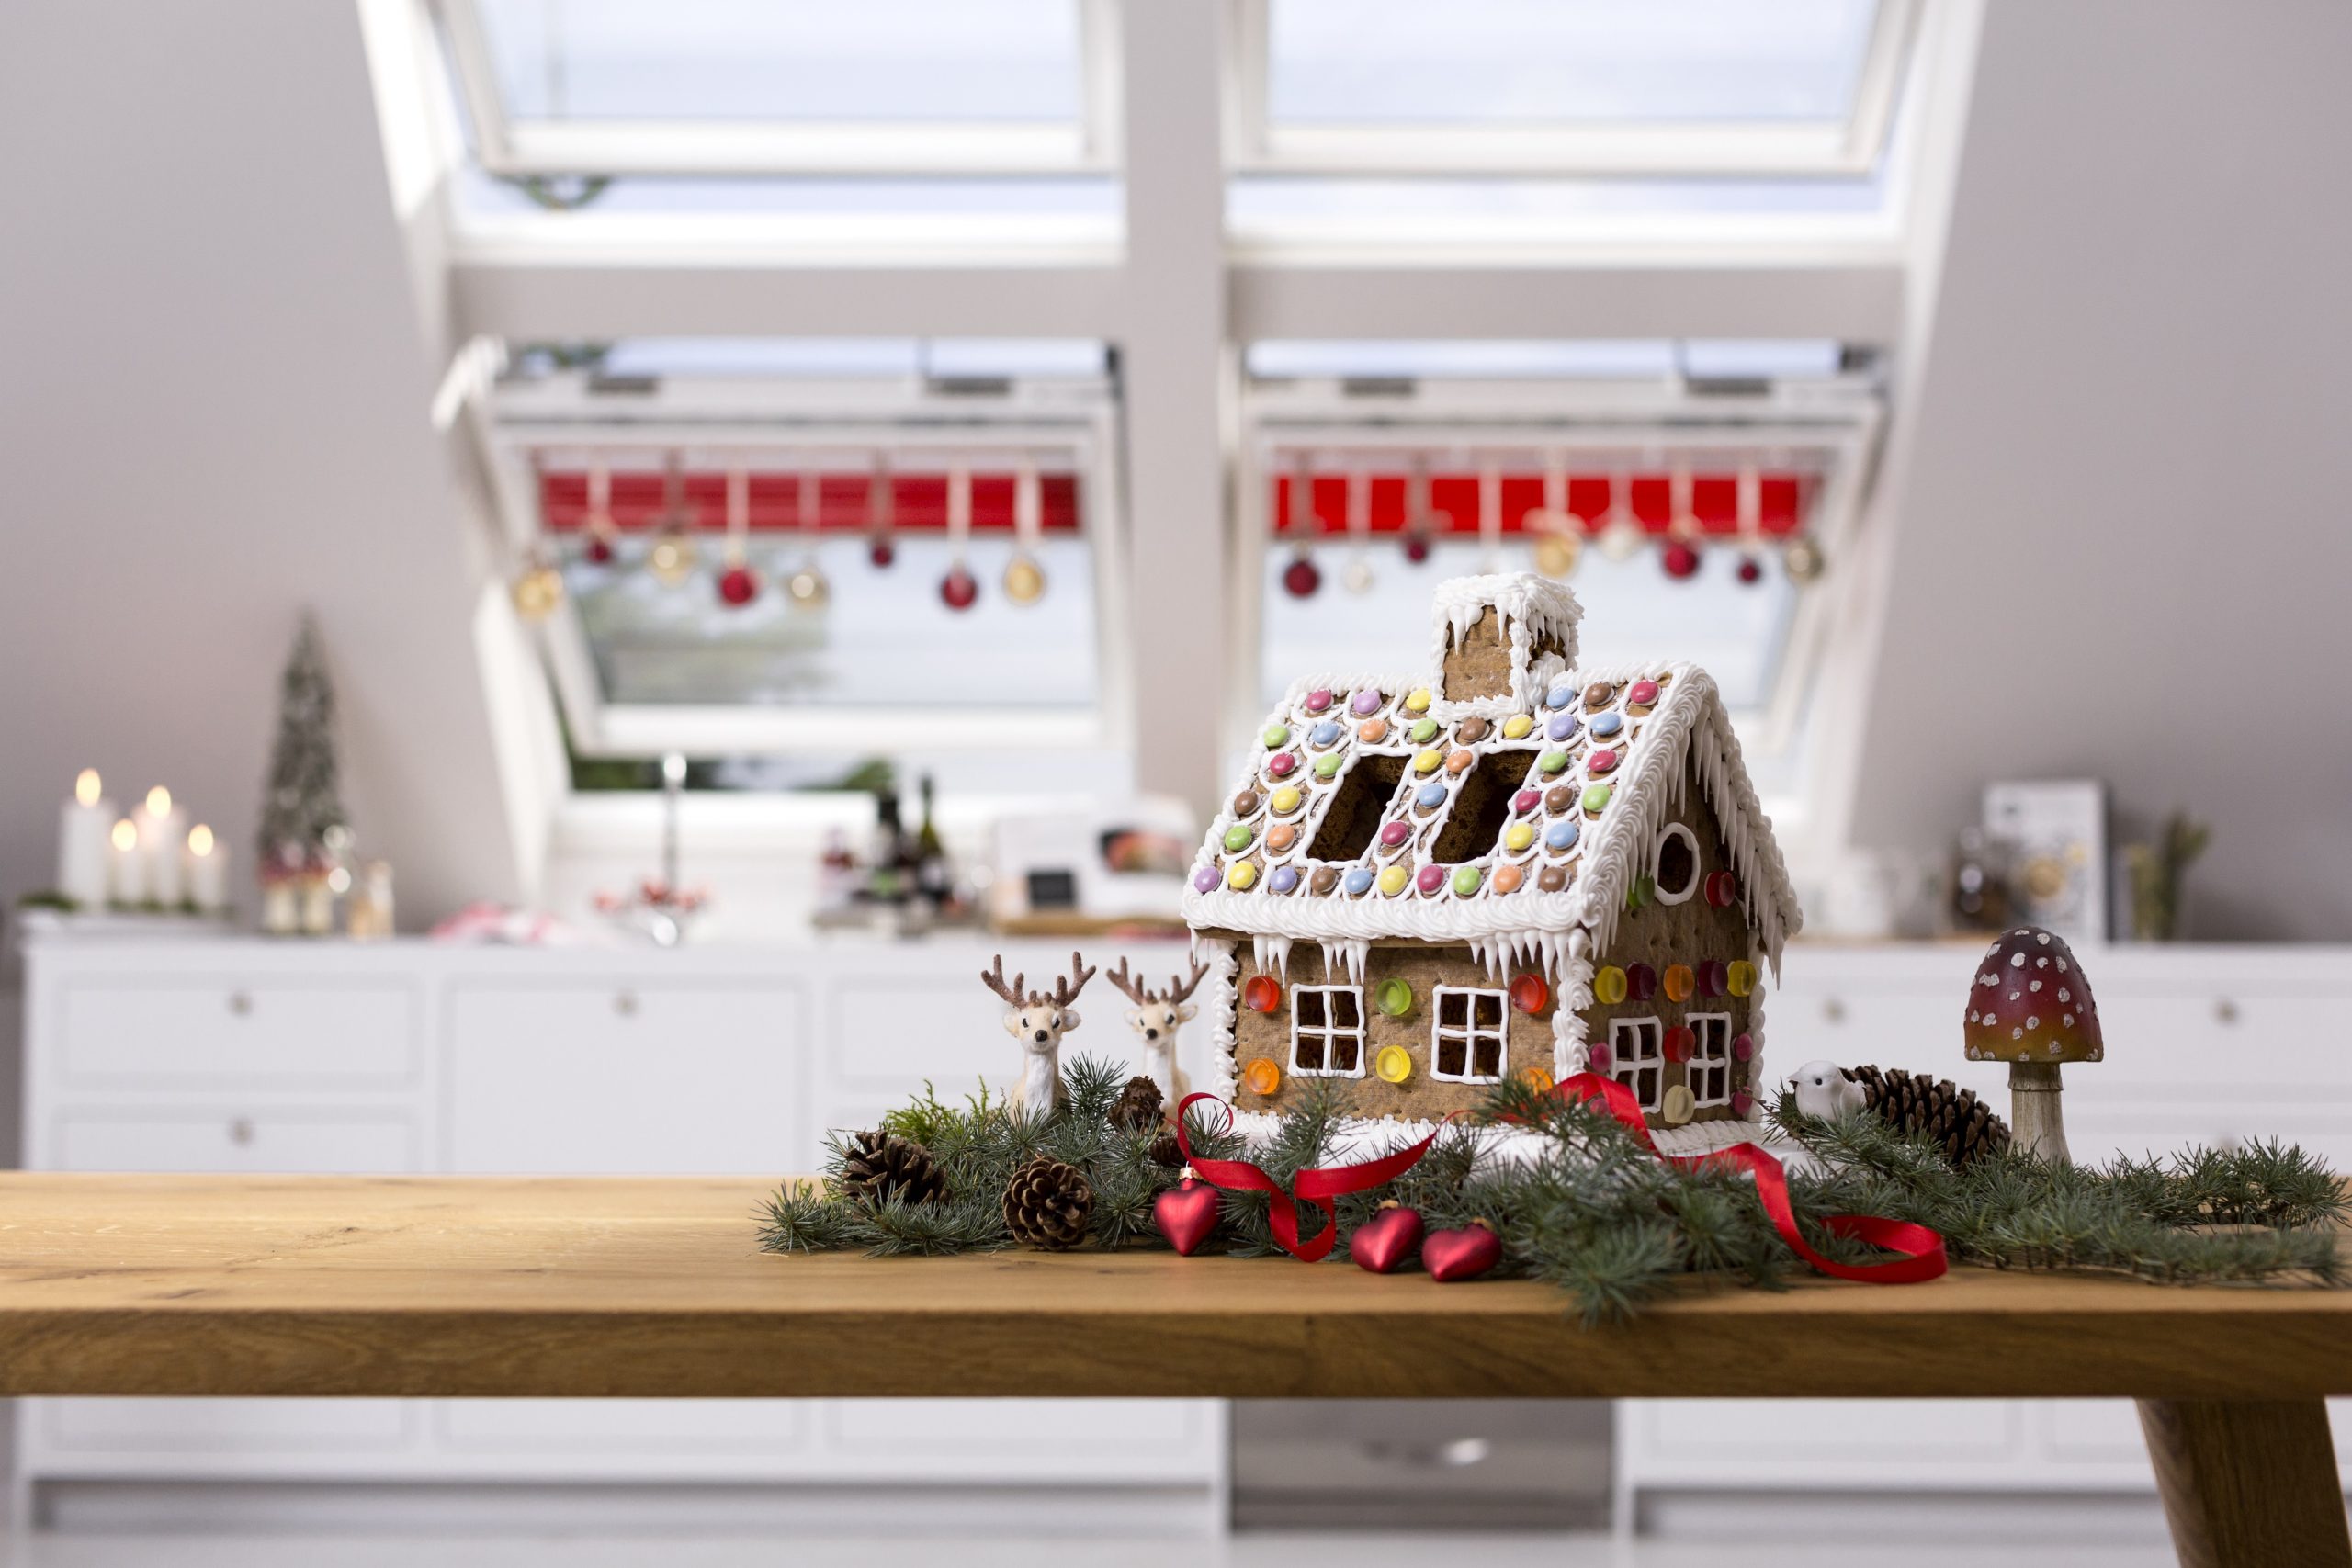 Have a light and bright festive season with VELUX® @VELUXGBI